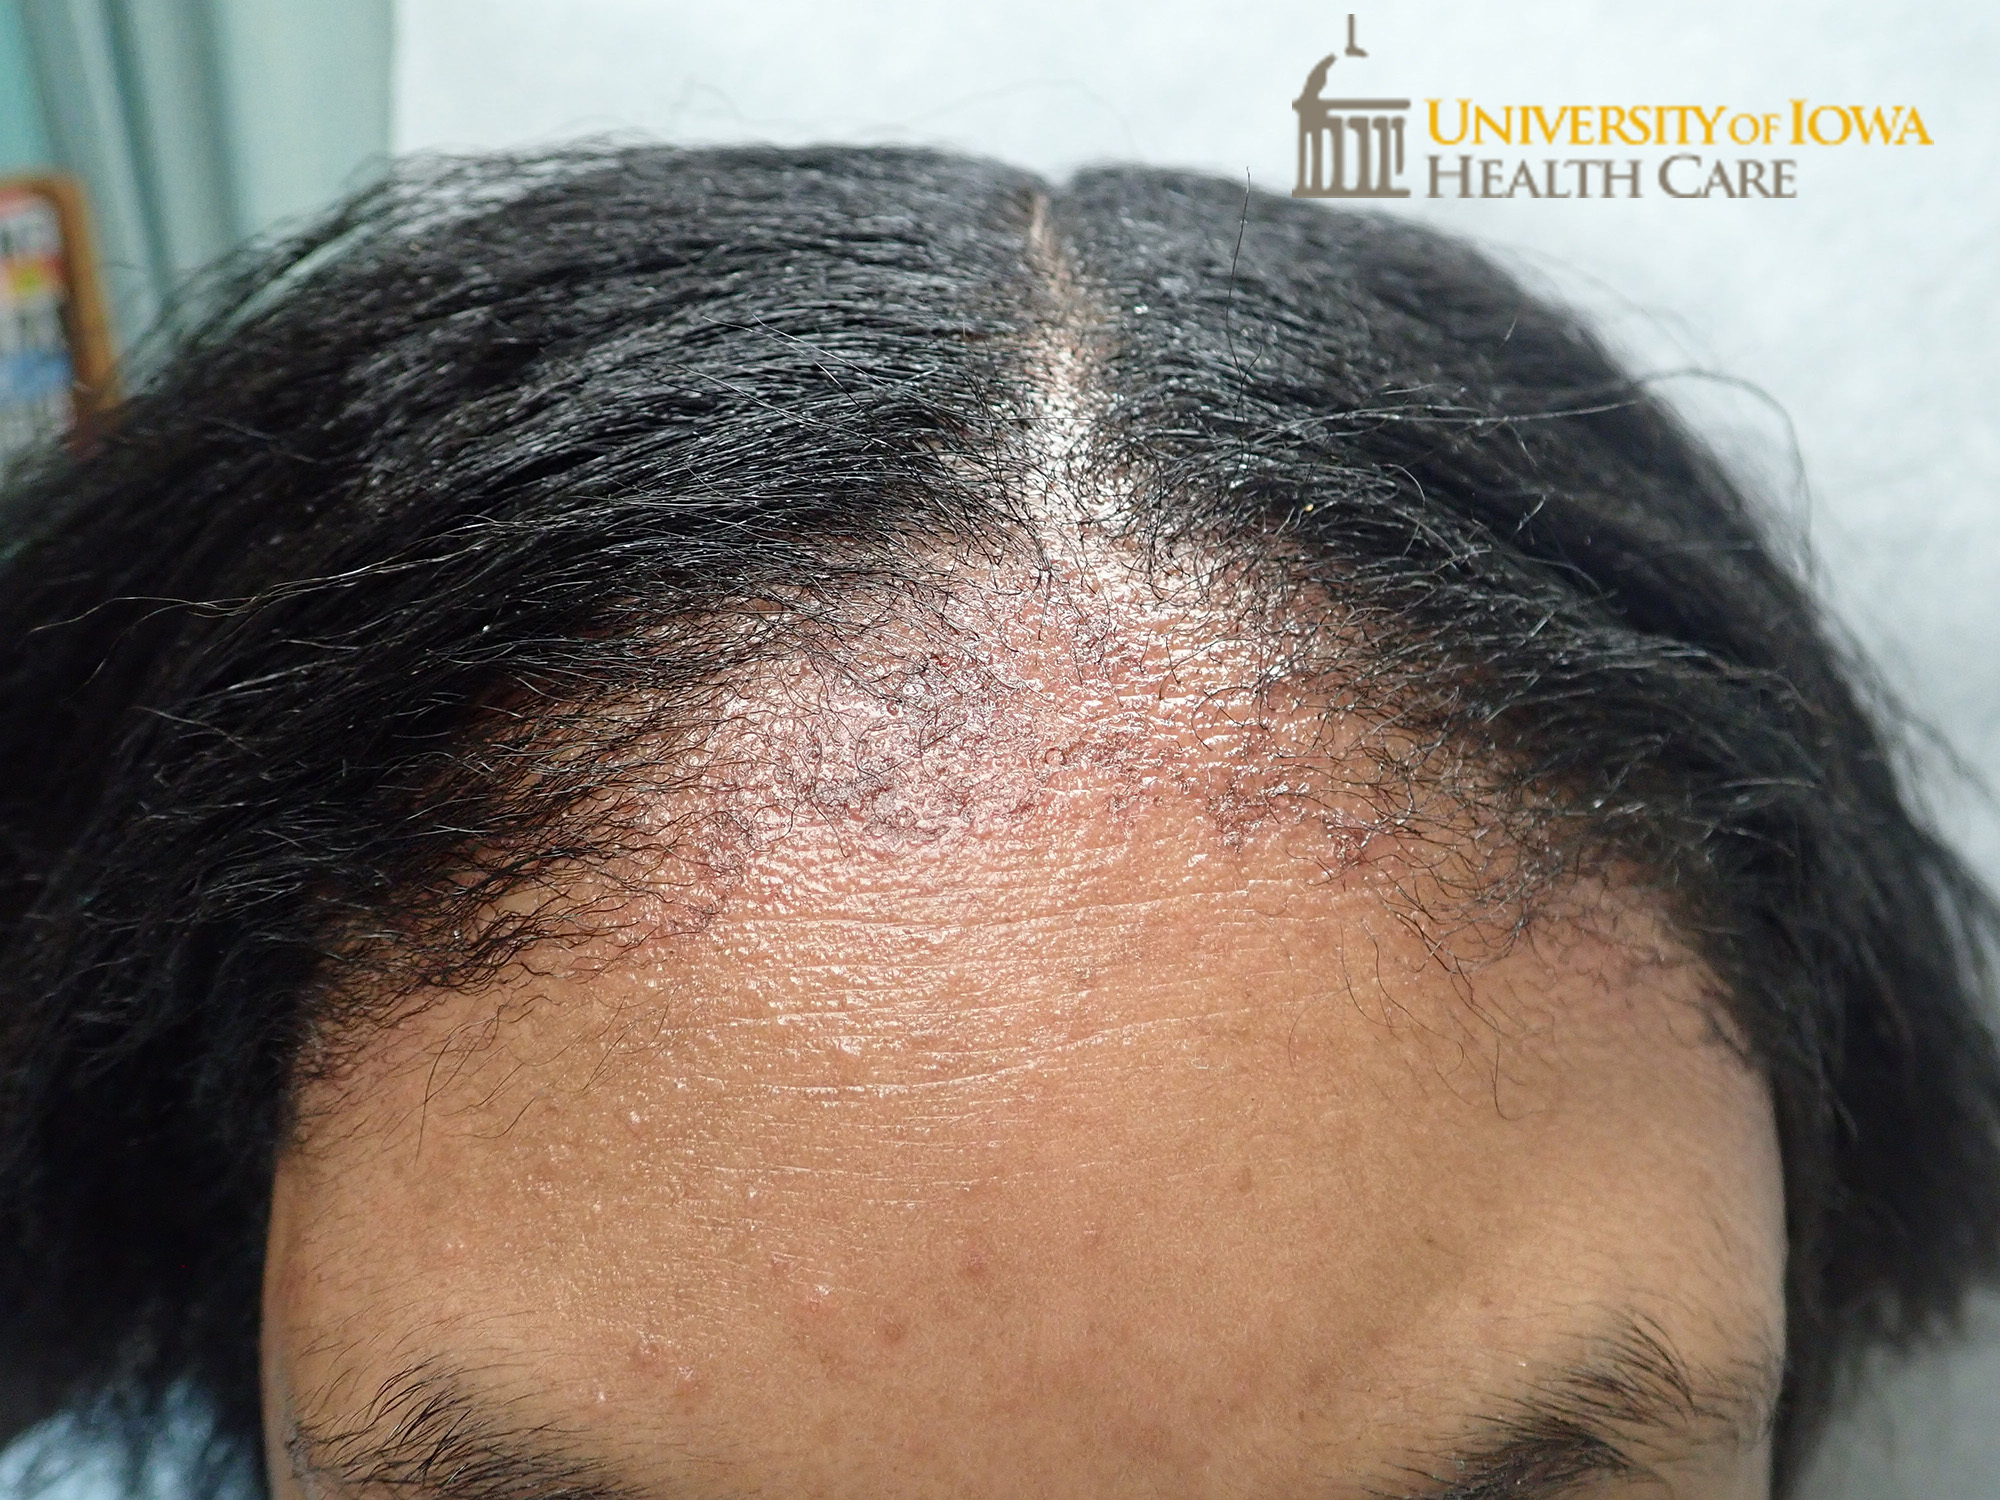 Erythematous papules with surrounding erythema on the frontal scalp. (click images for higher resolution).